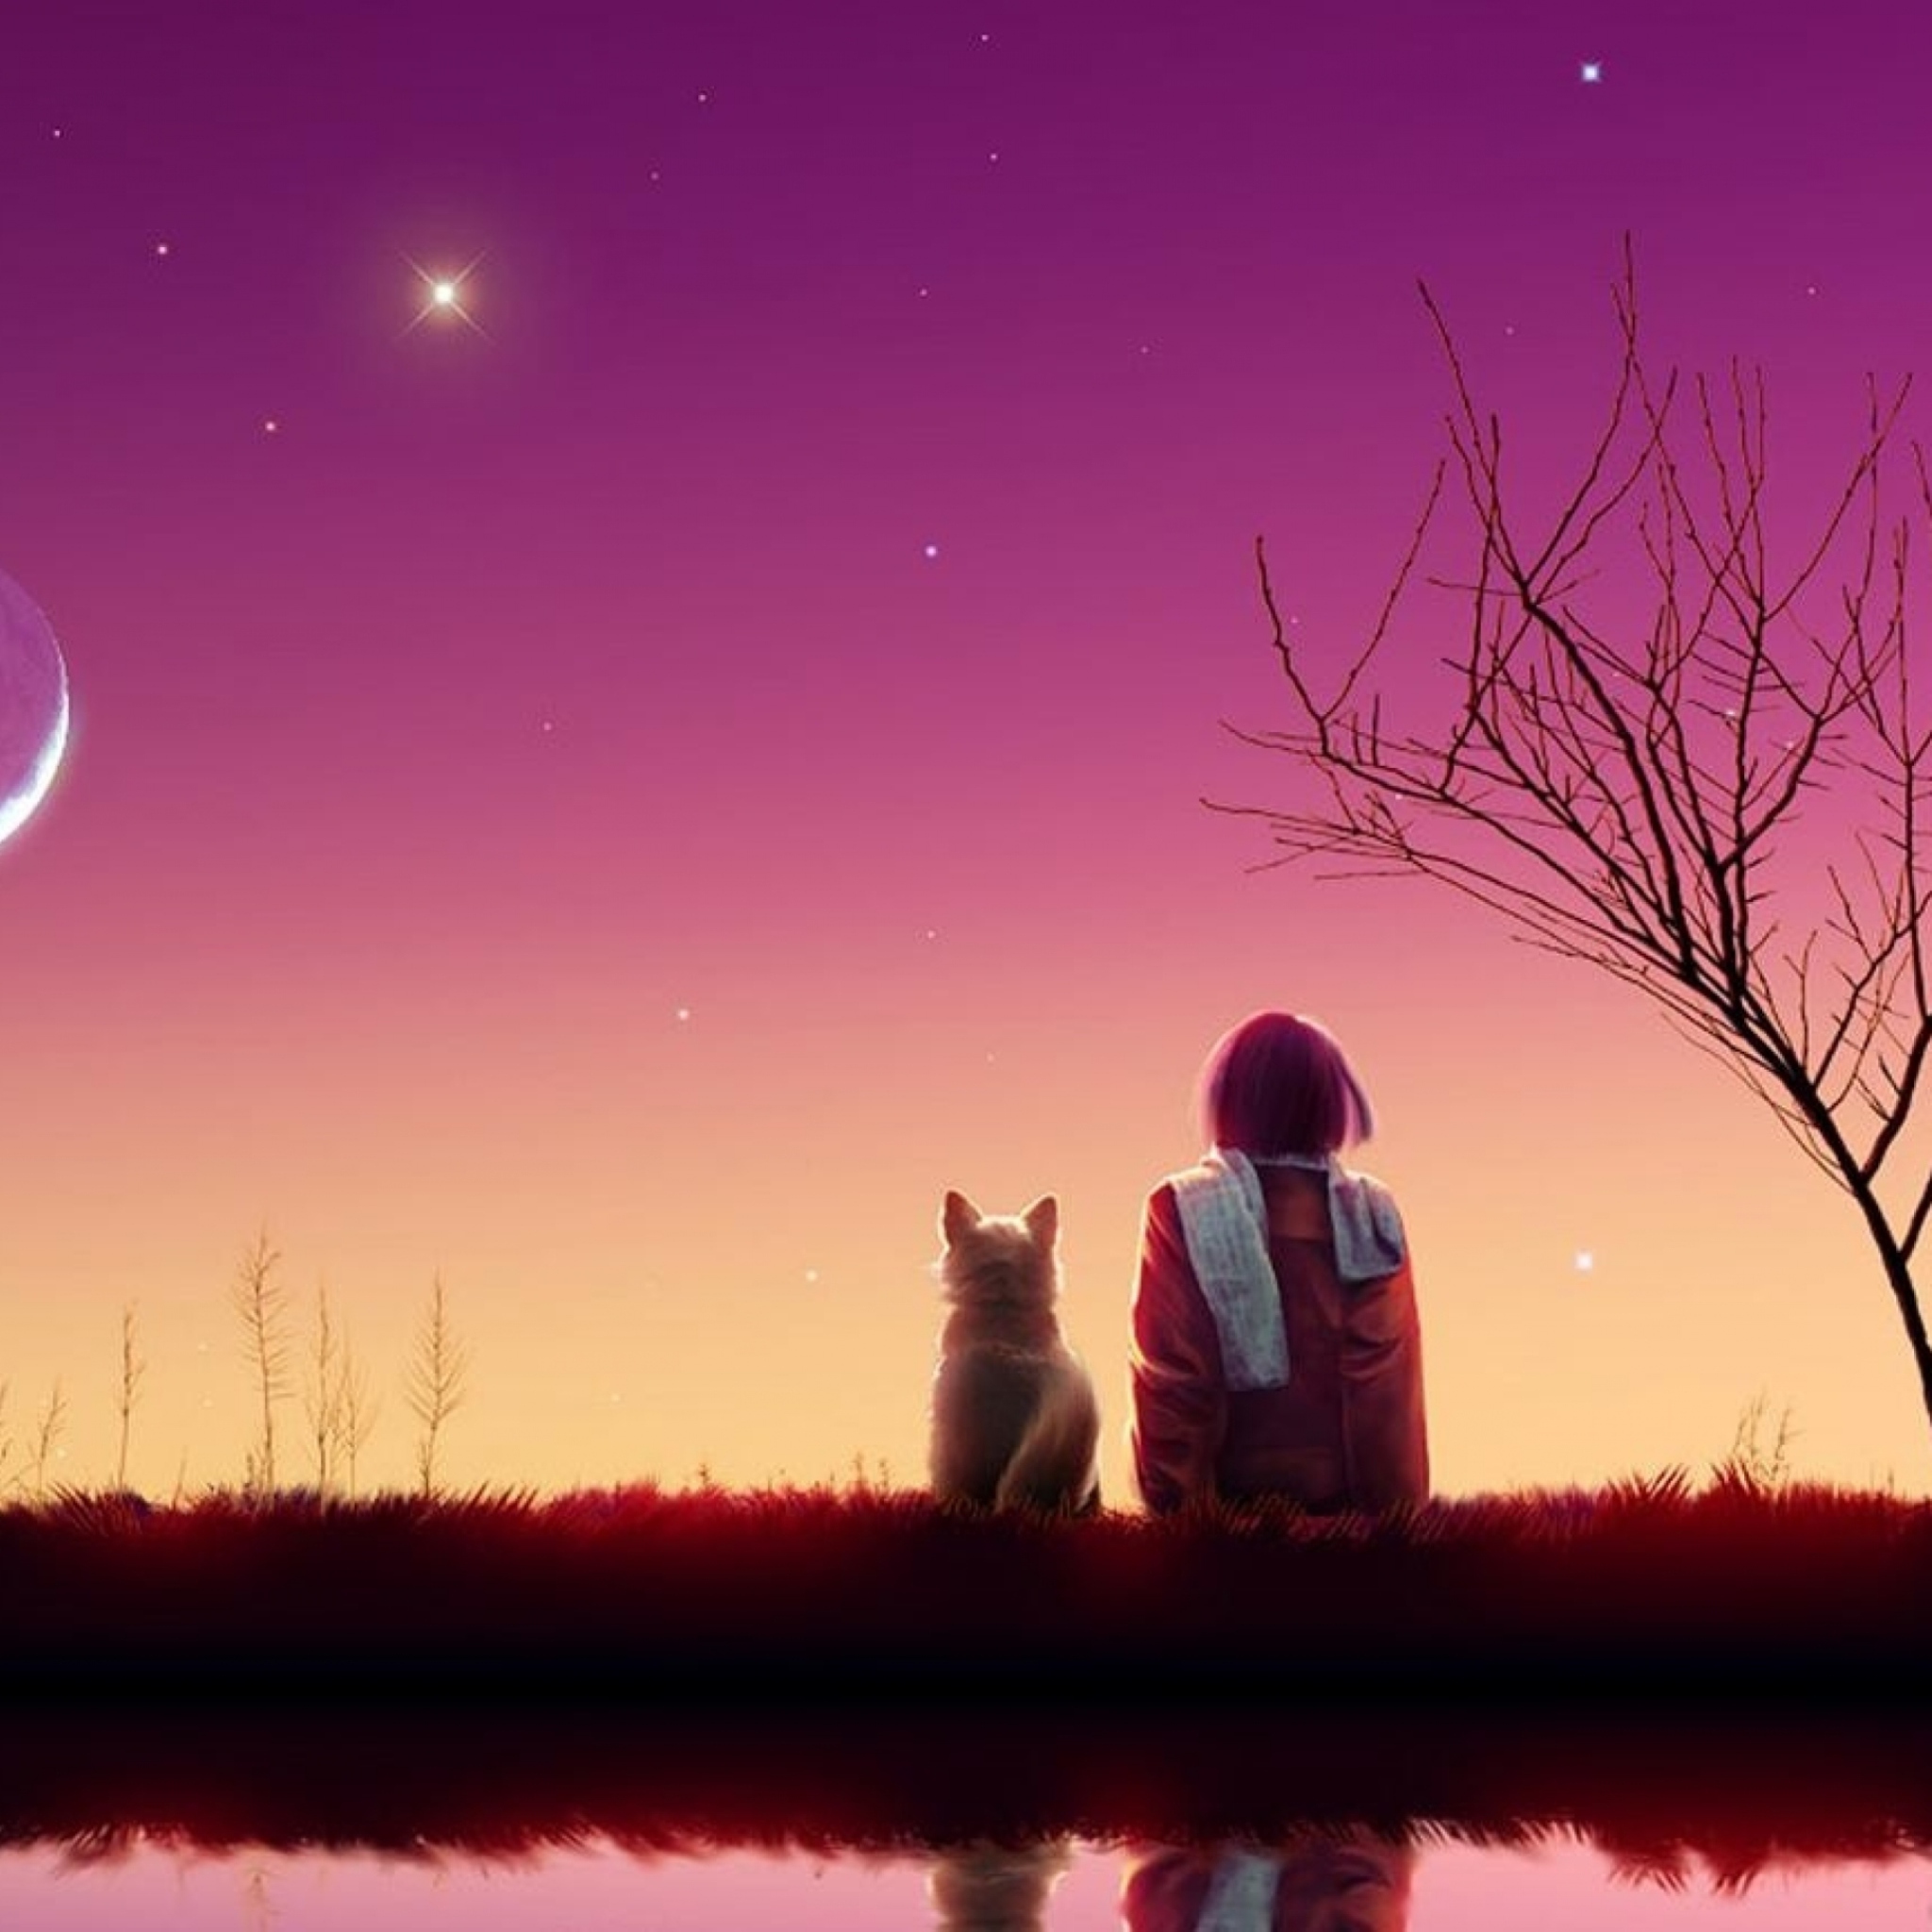 Das Girl And Cat Looking At Pink Sky Wallpaper 2048x2048